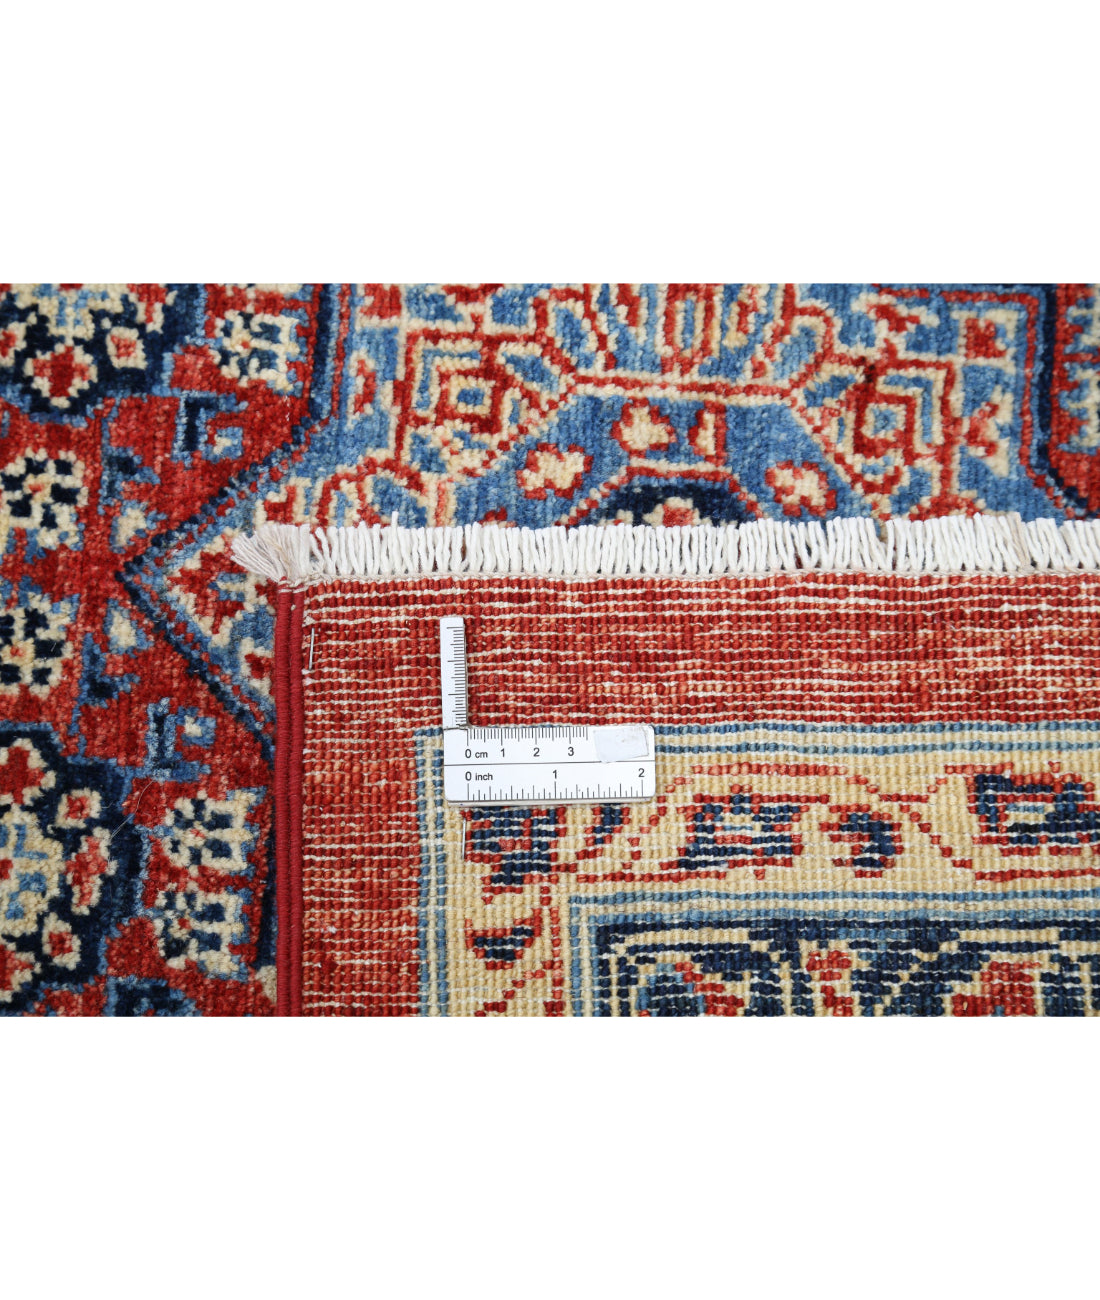 Hand Knotted Mamluk Wool Rug - 10'1'' x 13'8'' 10'1'' x 13'8'' (303 X 410) / Red / Blue